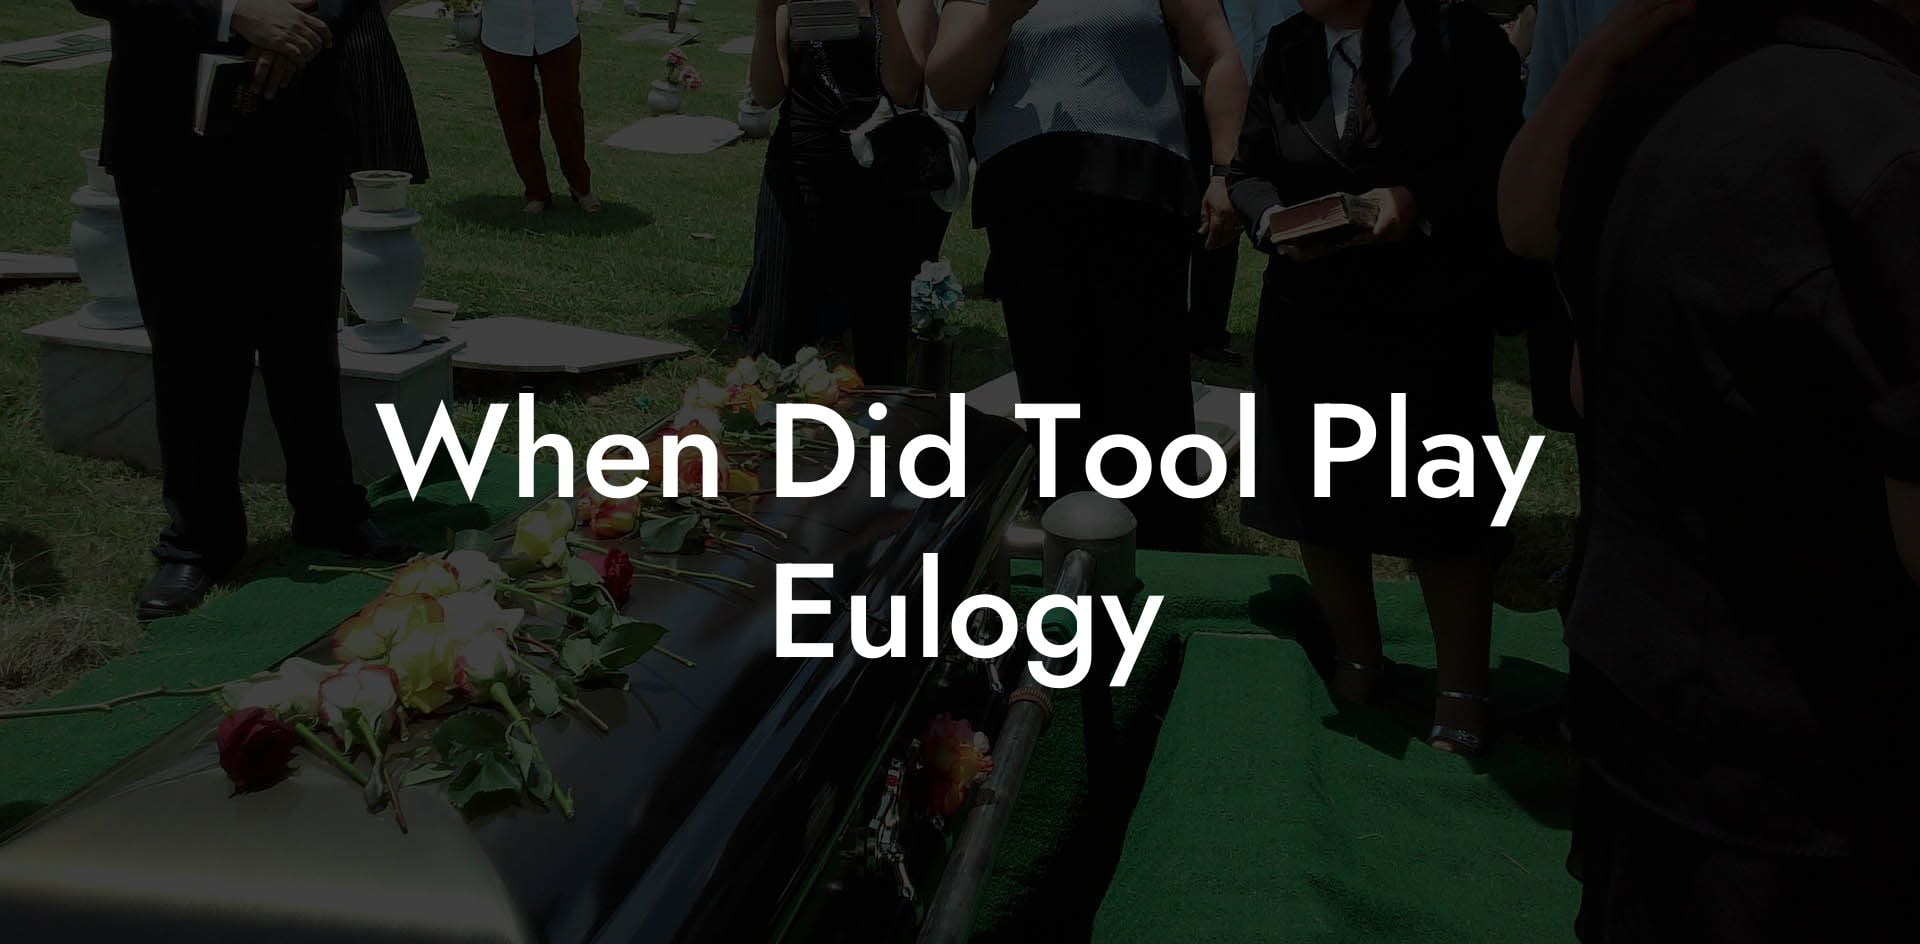 When Did Tool Play Eulogy